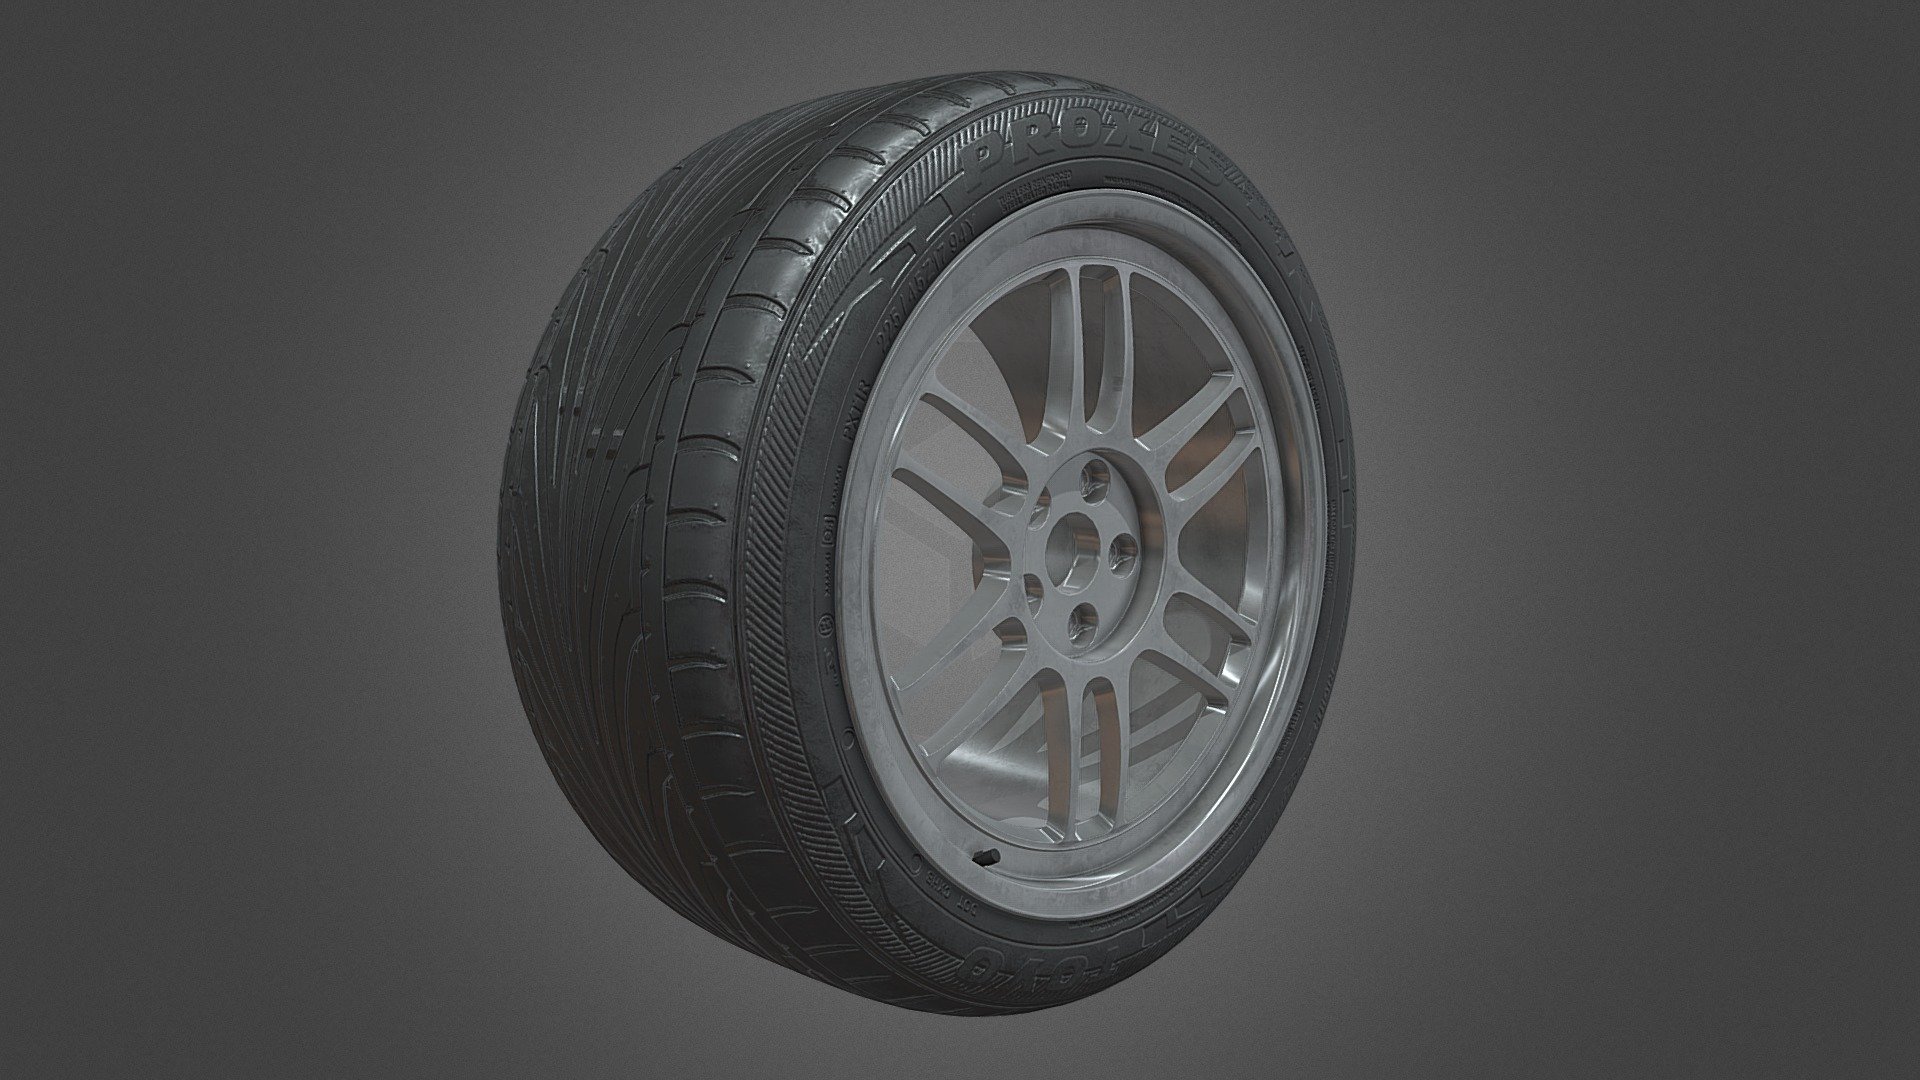 Alloy wheel and tire model based on the Enkei RPF1 and Toyo Proxes T1R respectively.

Personal project. Please visit my Artstation account for full project breakdown. Thank you for looking.

@pjscottartist - Enkei RPF1 & Toyo Proxes T1R Tire - 3D model by pjscottartist 3d model